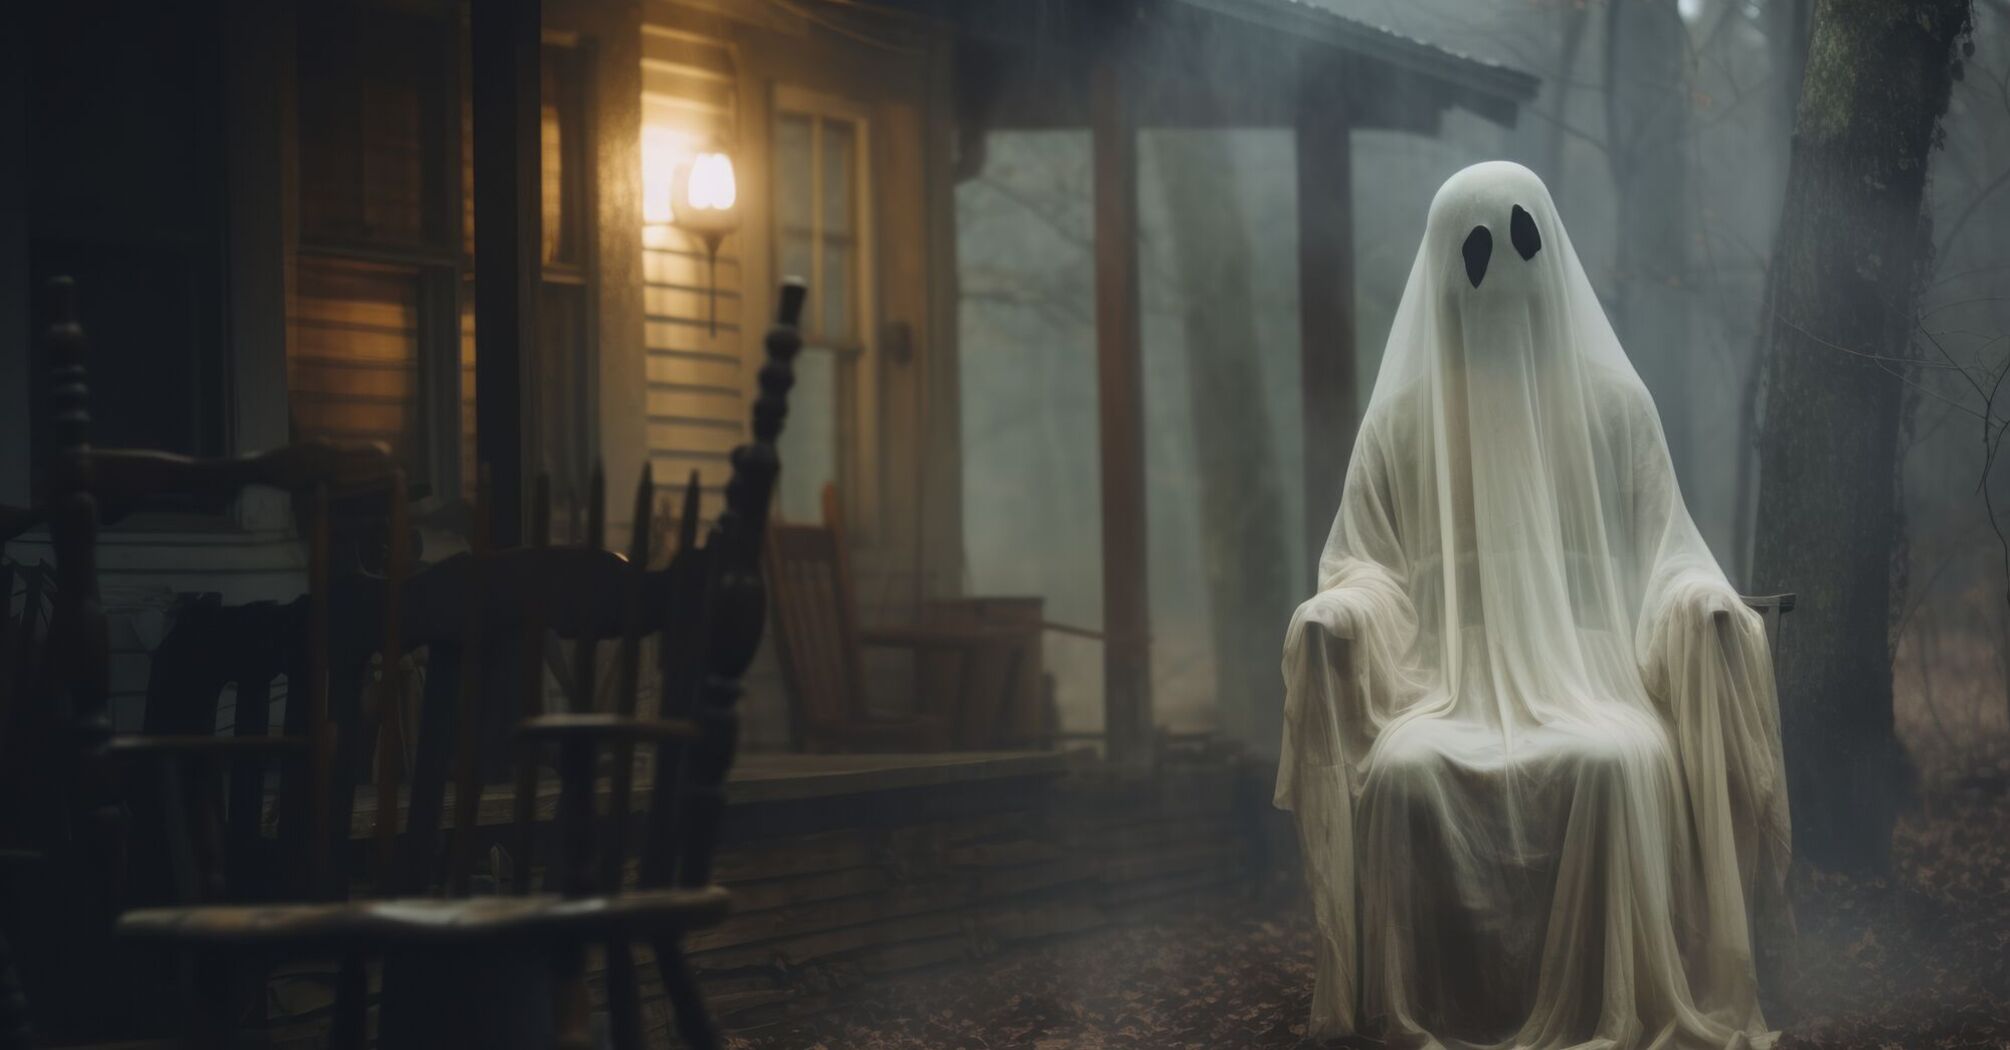 Paranormal tourism: 20 US cities that serve as home to ghosts